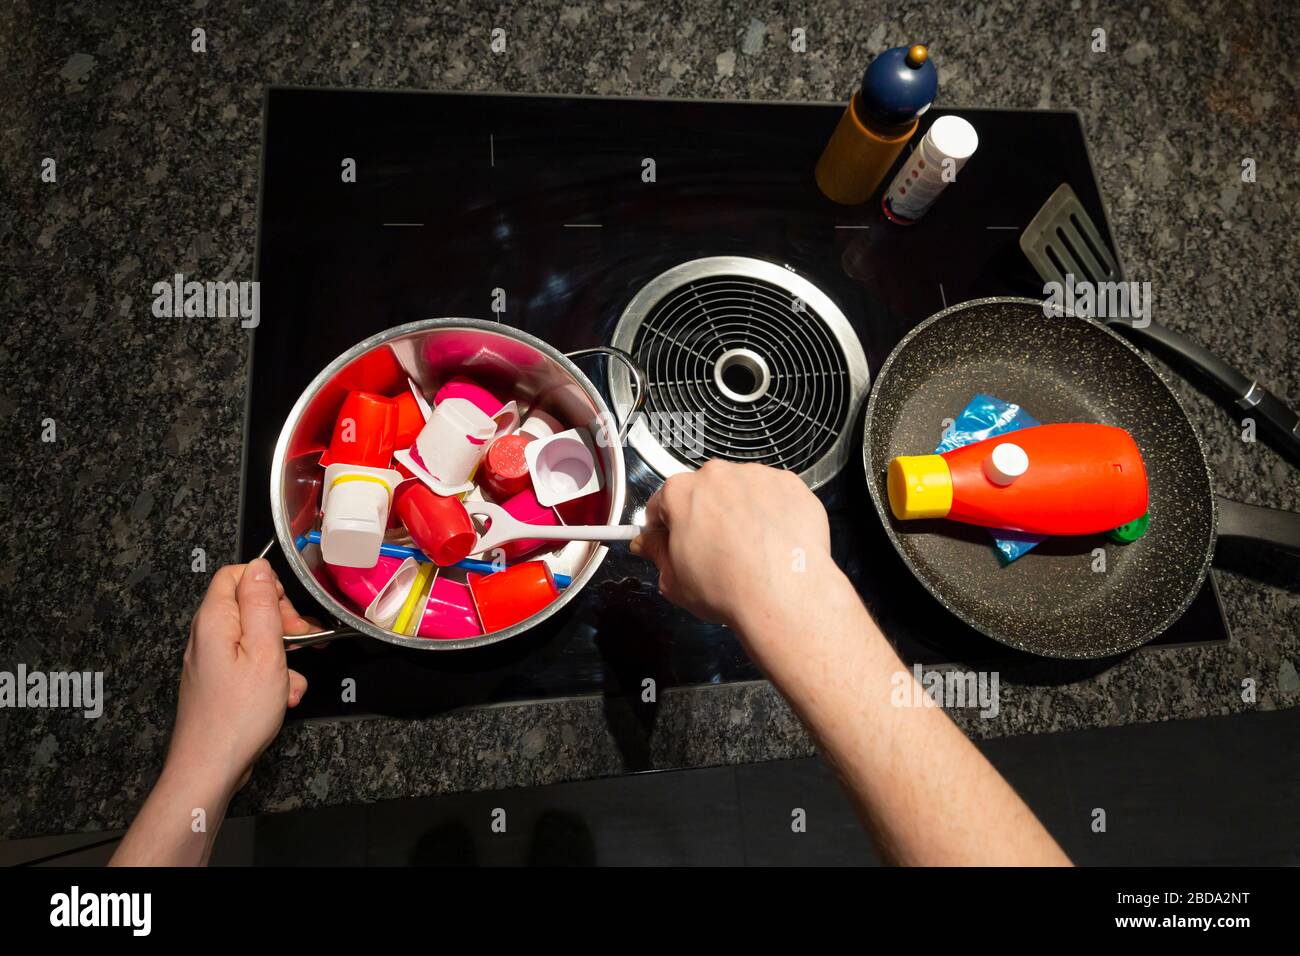 Concept of food pollution with plastic waste. Top view of a persons hands at a stove with a frying and a cooking pan filled with plastic objects Stock Photo